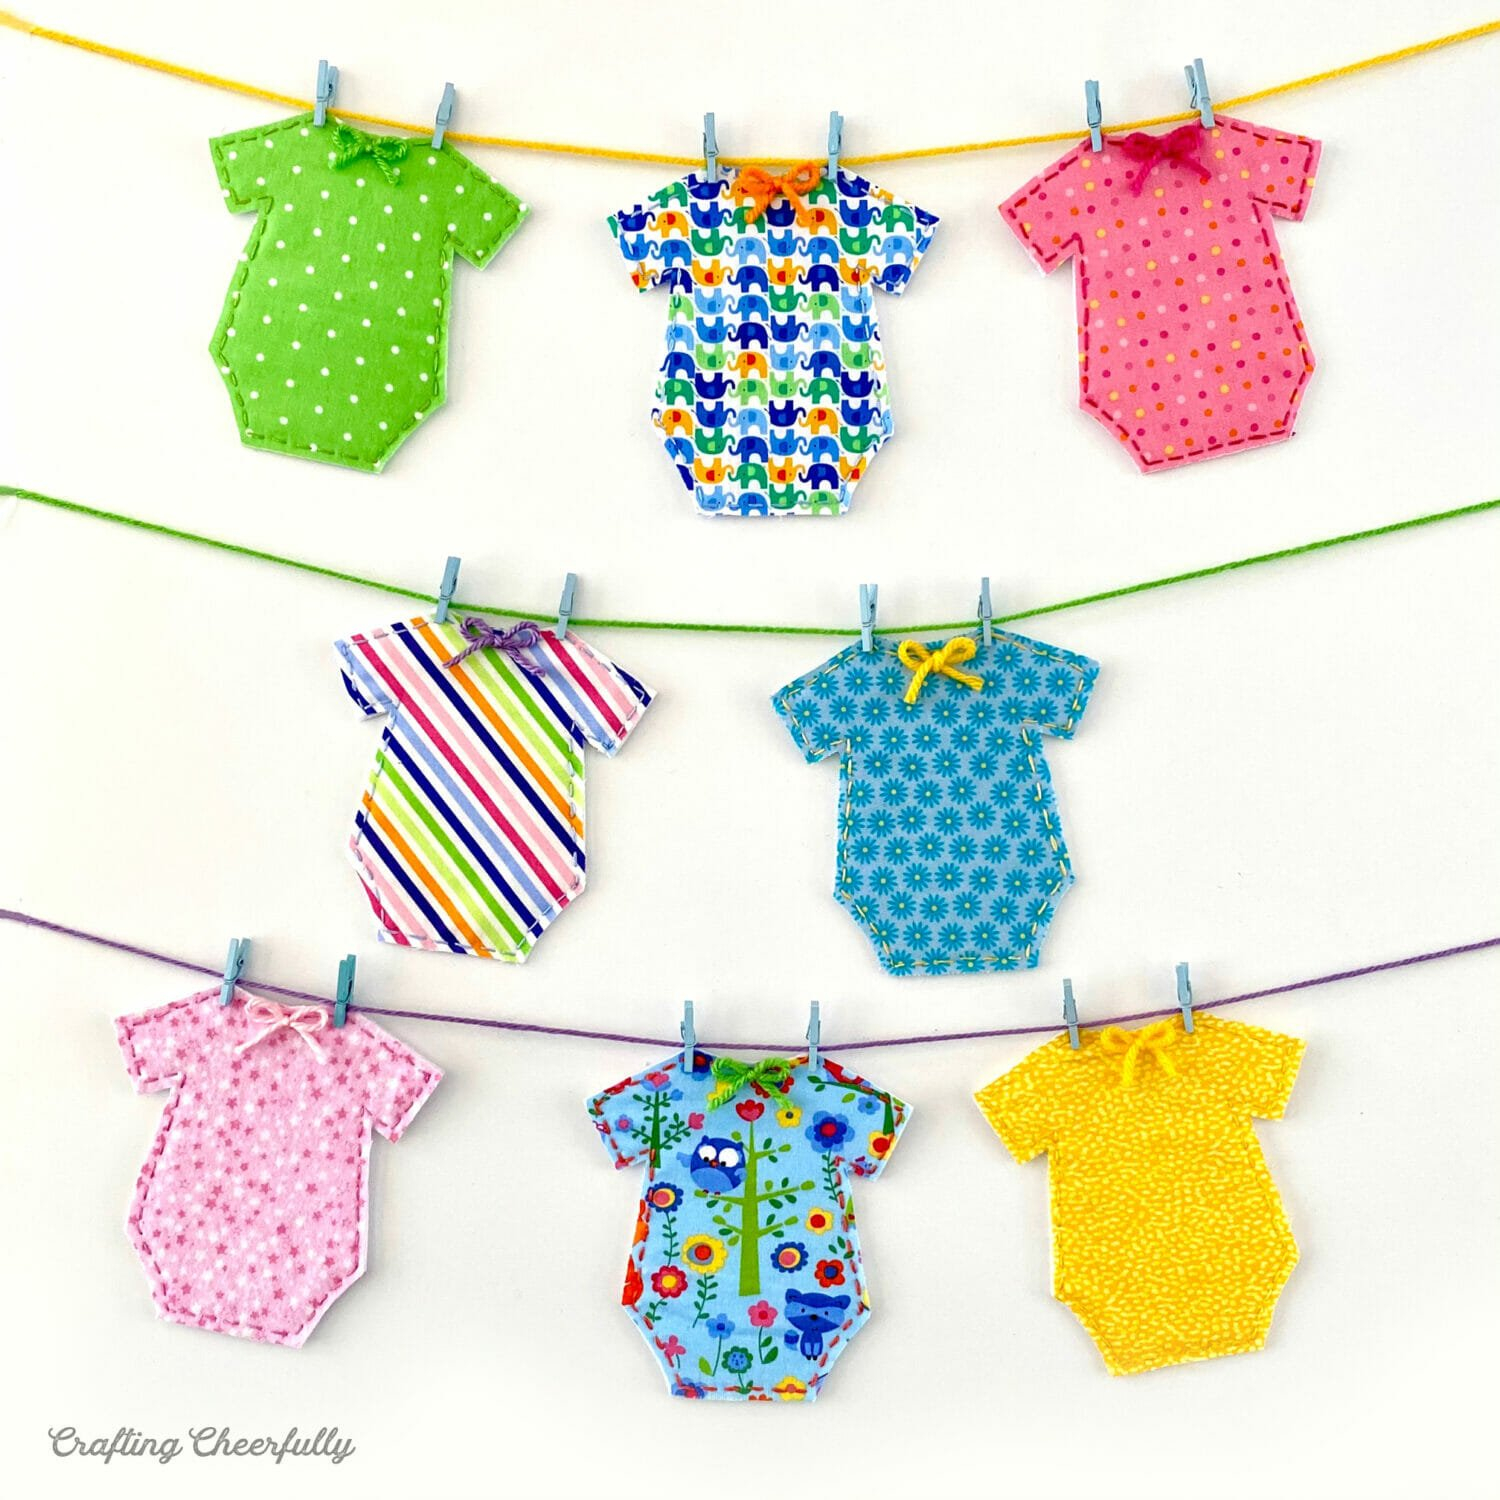 DIY Baby Shower Banner - Crafting Cheerfully With Diy Baby Shower Banner Template